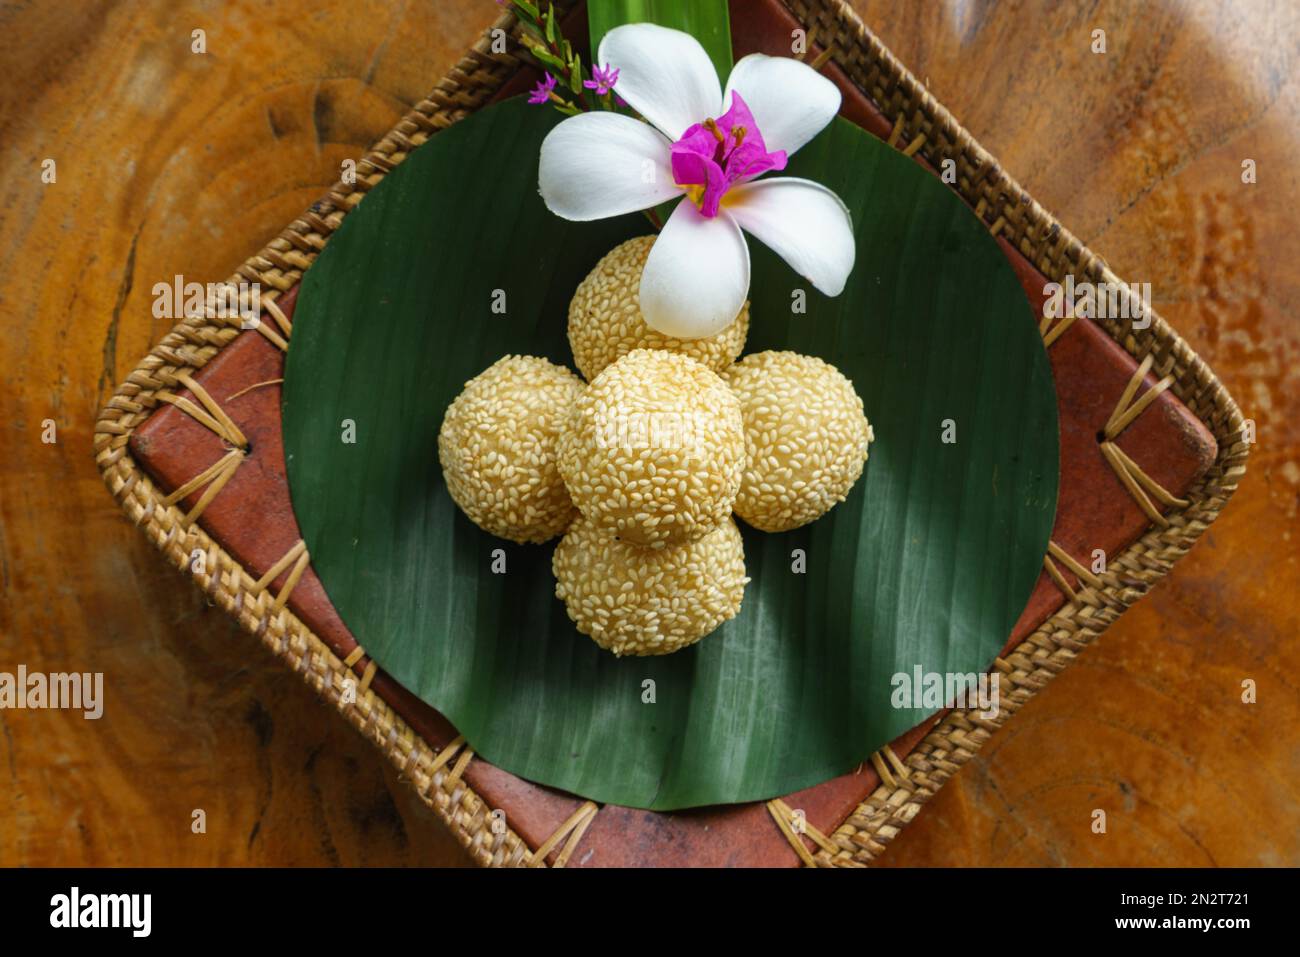 Overhead view of a bowl of traditional Indonesian Onde onde balls with sesame seeds Stock Photo